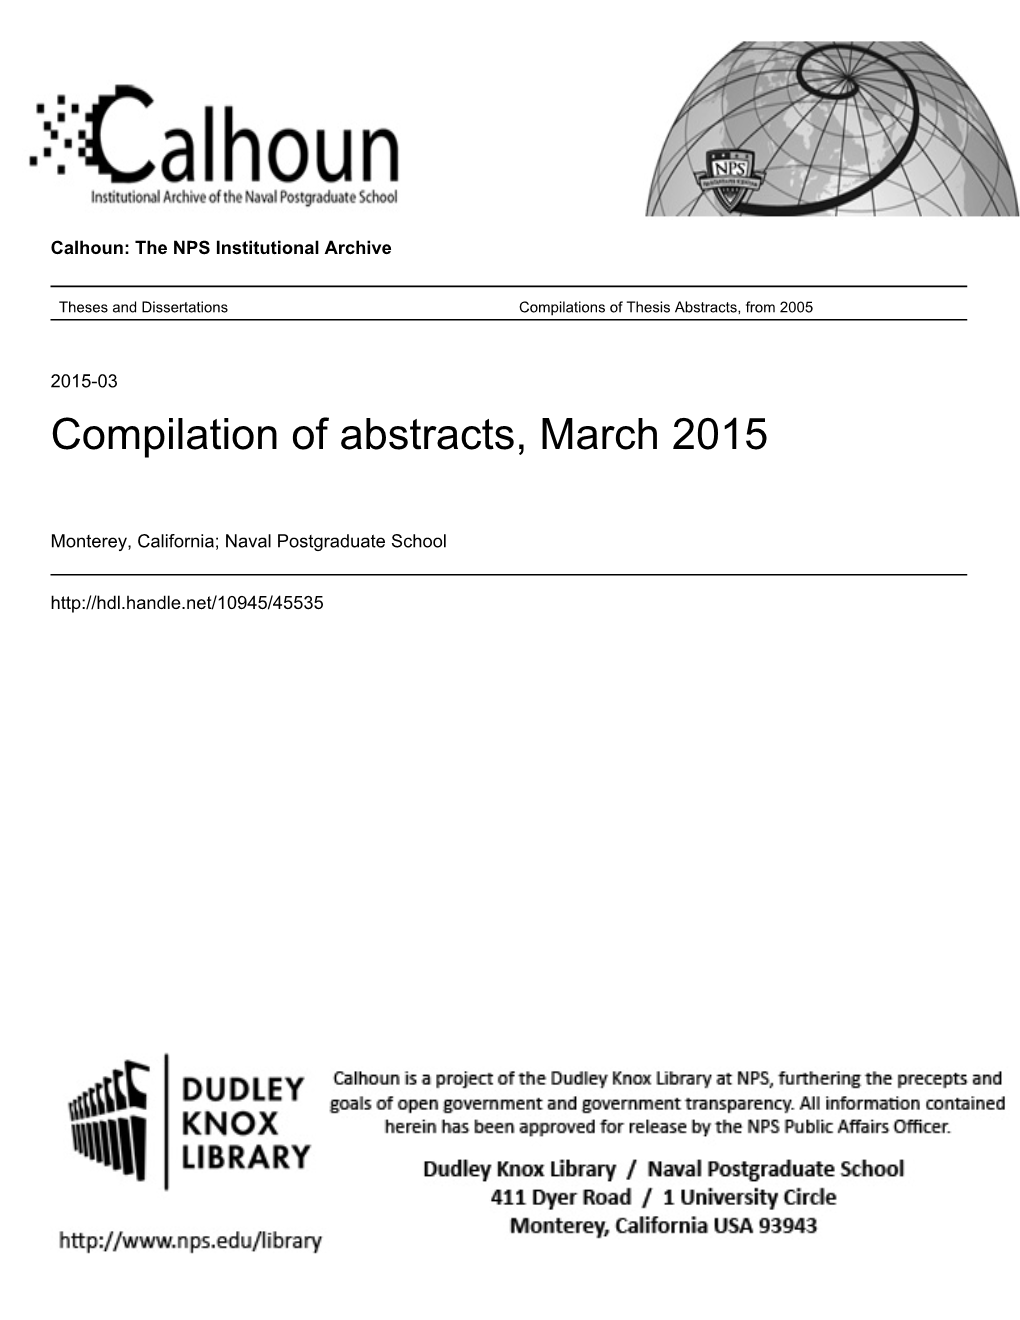 Compilation of Abstracts, March 2015